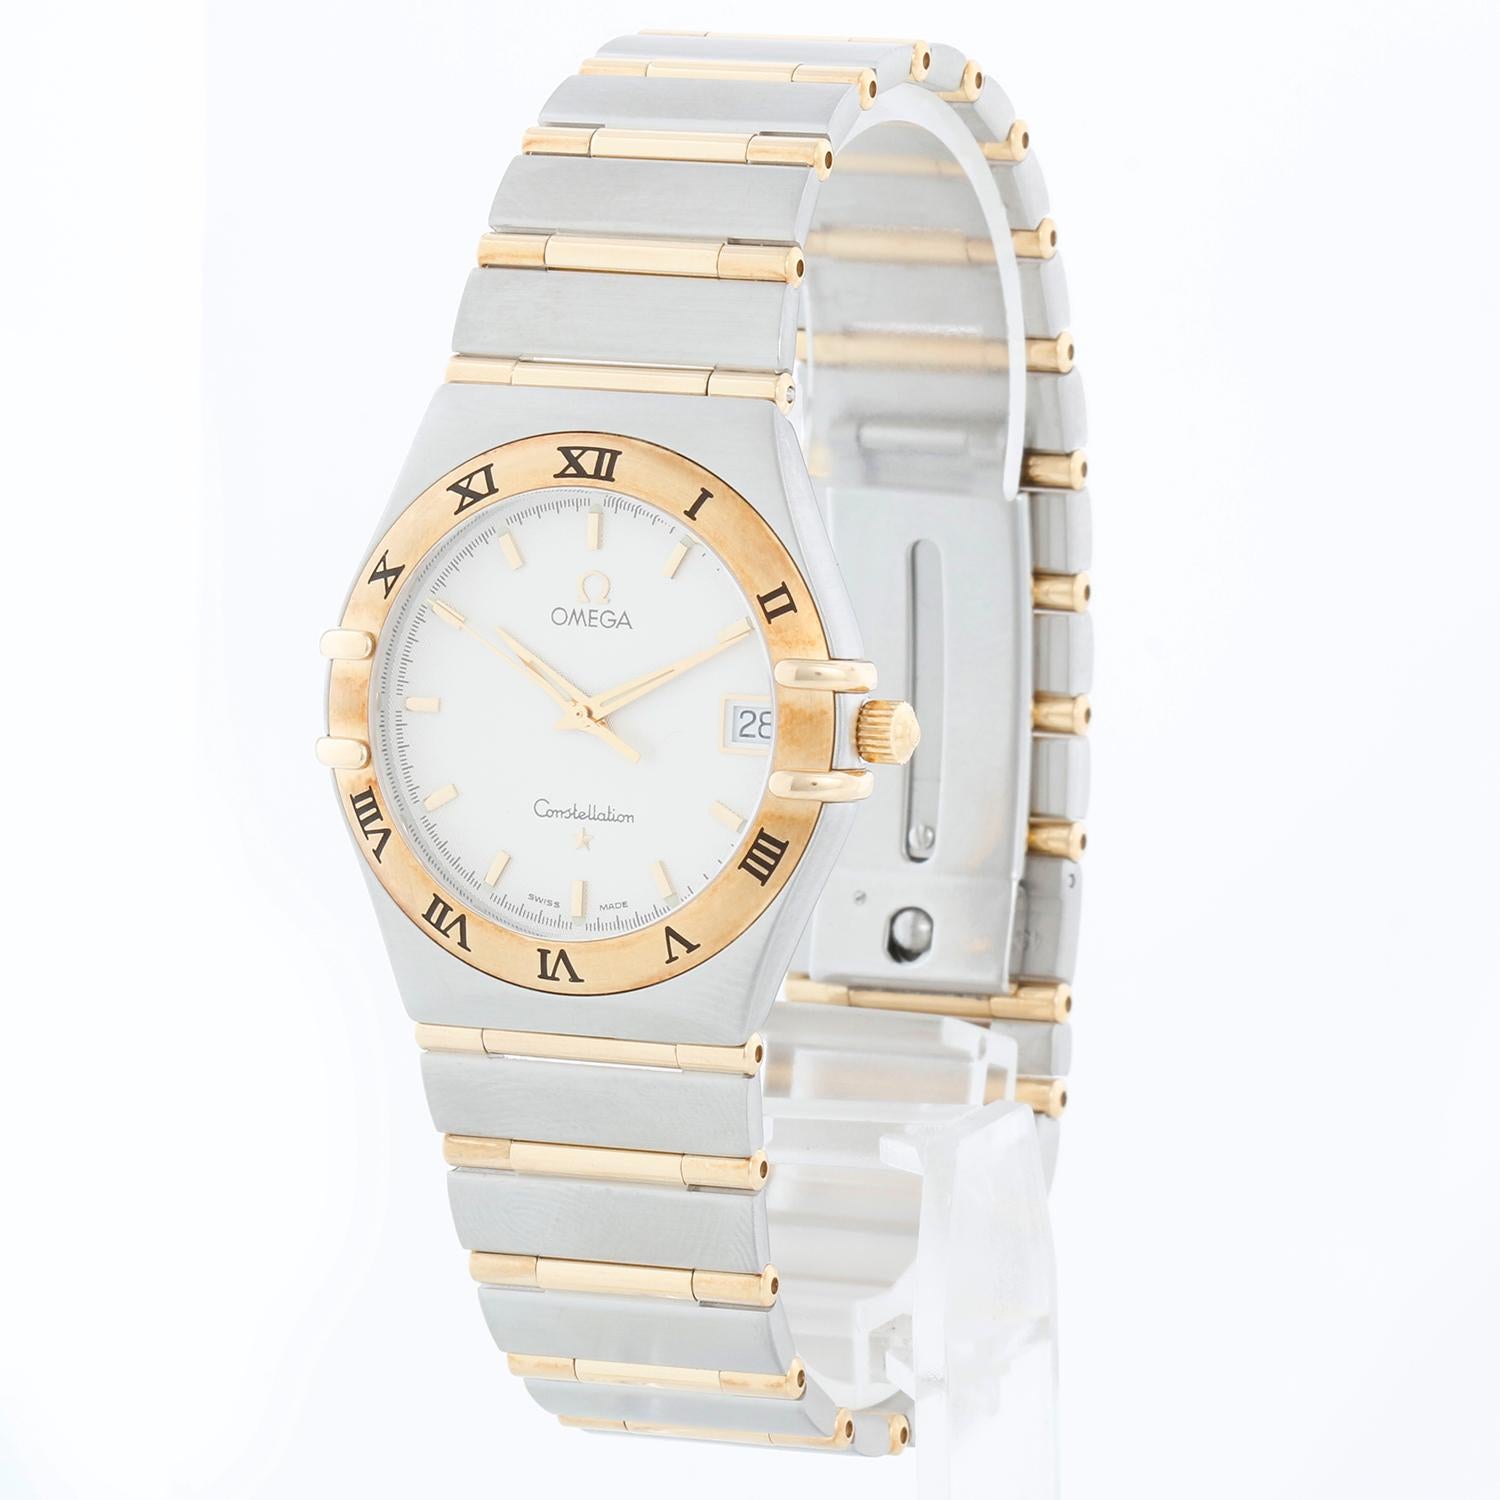 Omega Constellation 2-Toned Men's Watch - Quartz. Stainless steel with 18K yellow gold fixed bezel  (33mm). White dial with luminous hands; date at 3 o'clock. Stainless steel deployment buckle clasp. Pre-owned with custom box.